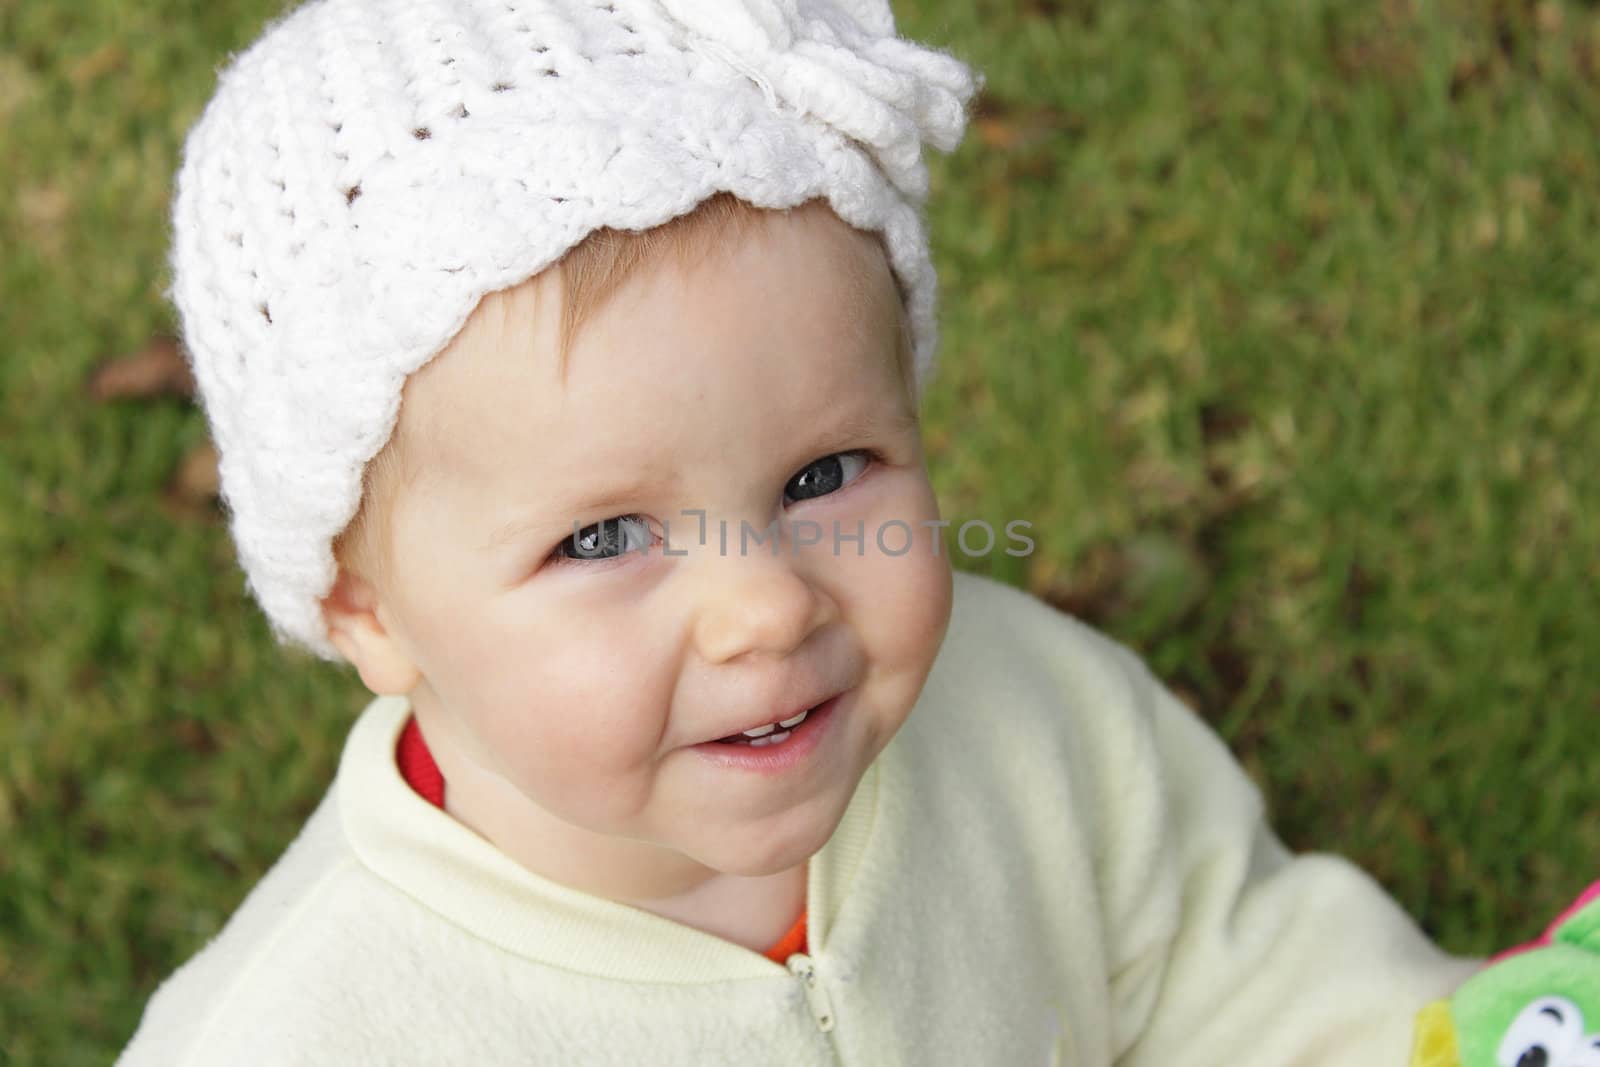 Cute infant girl with knit white hat